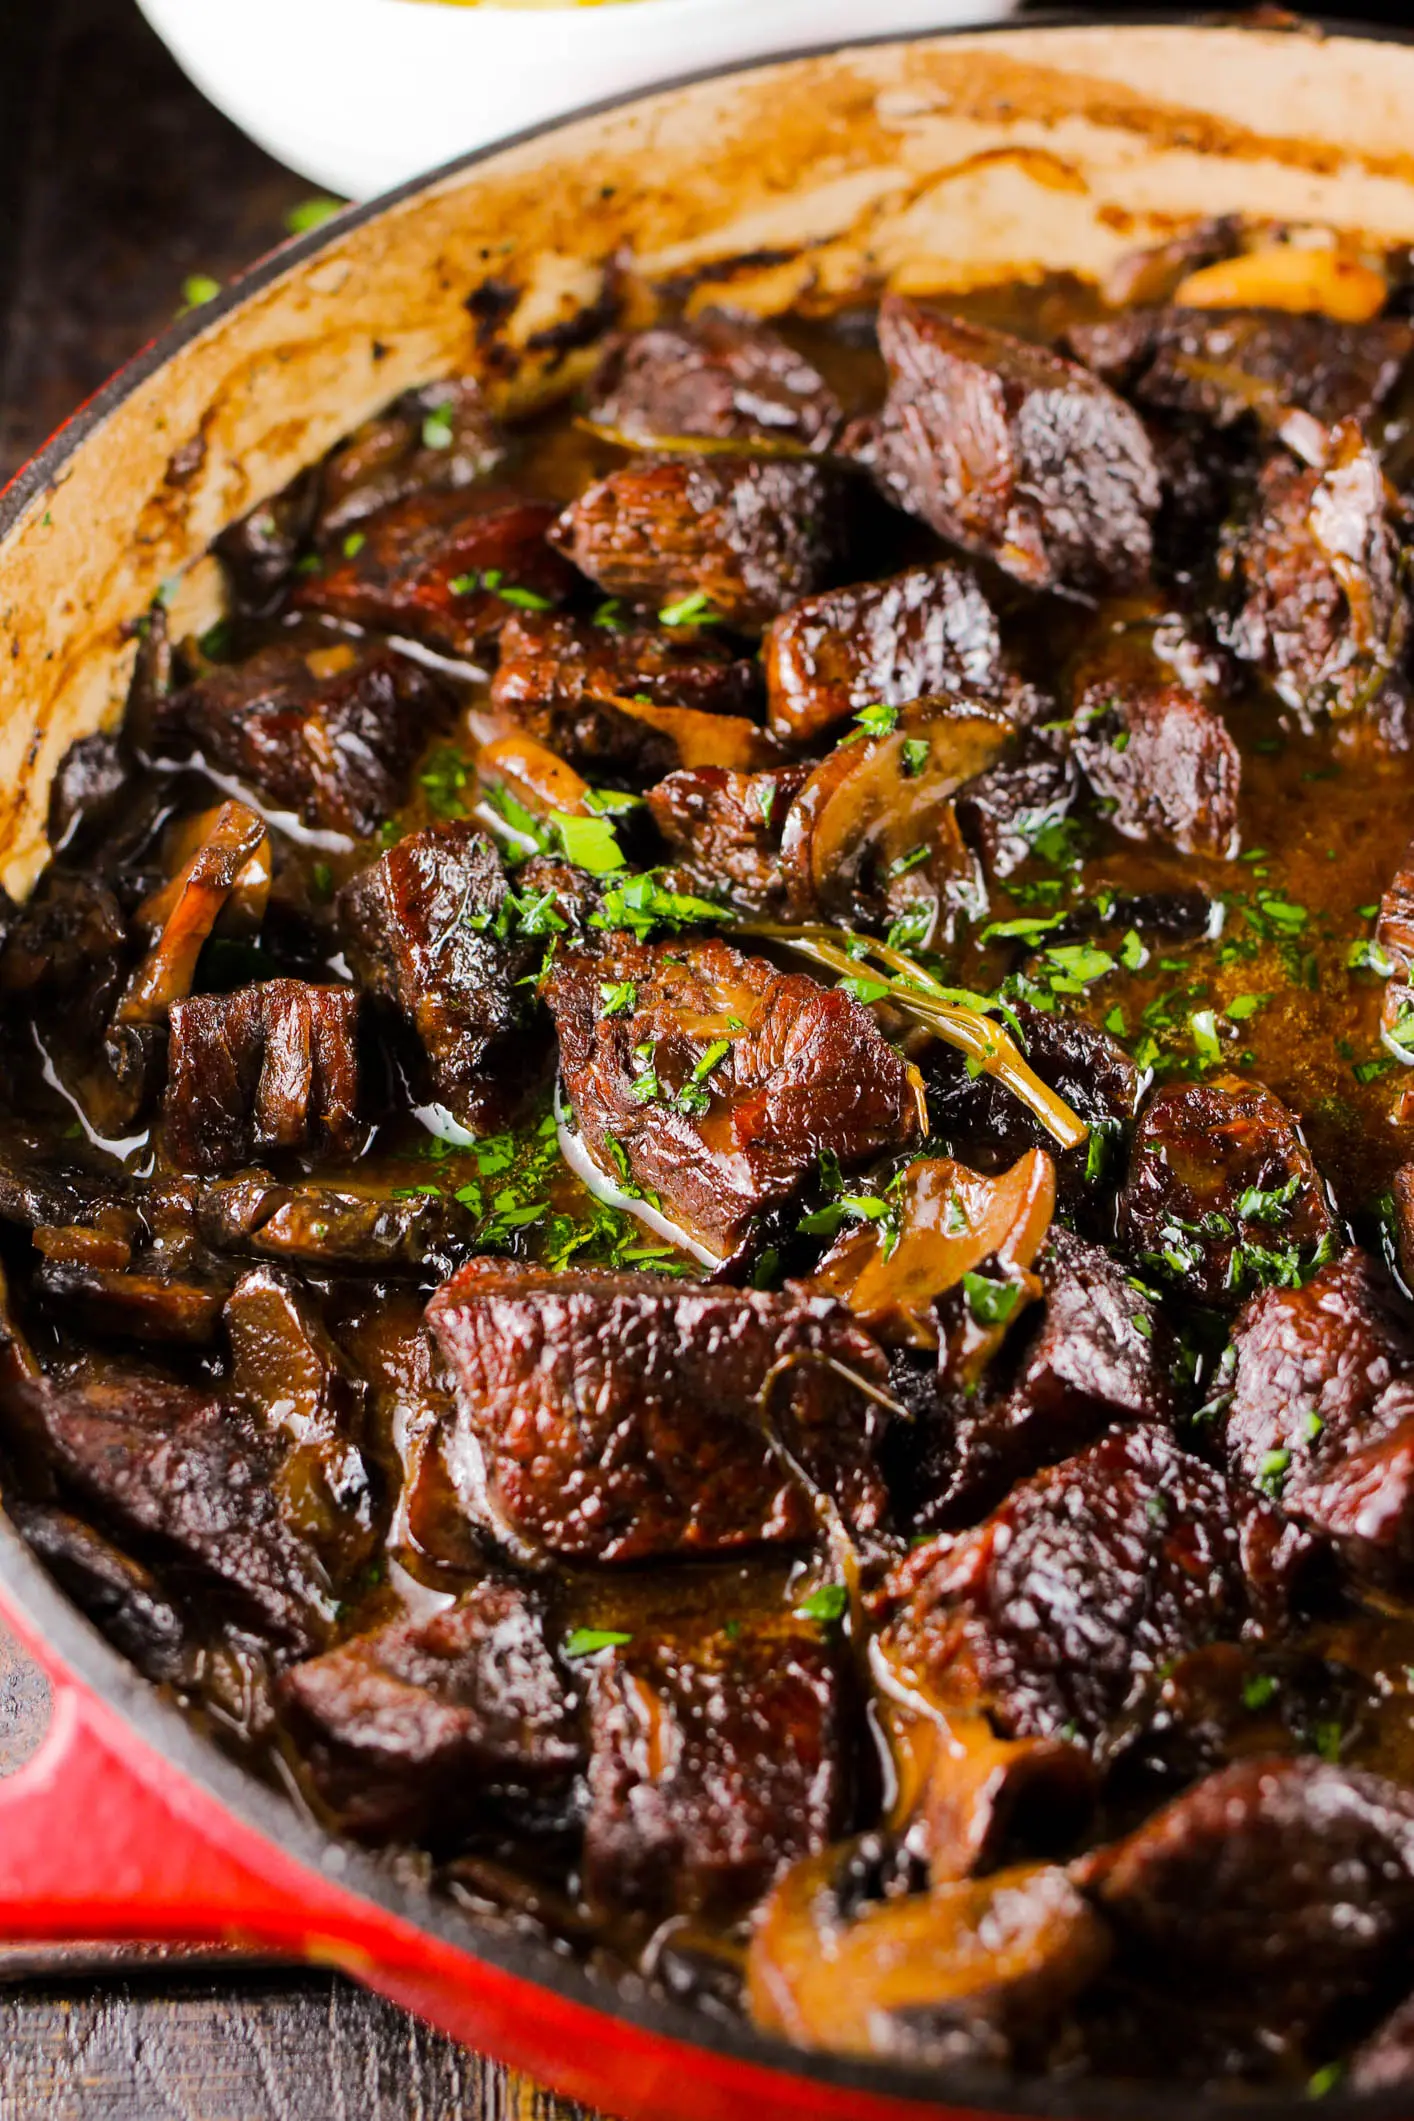 Delicious Wild Mushroom and Beef Stew Recipe [Food Find]